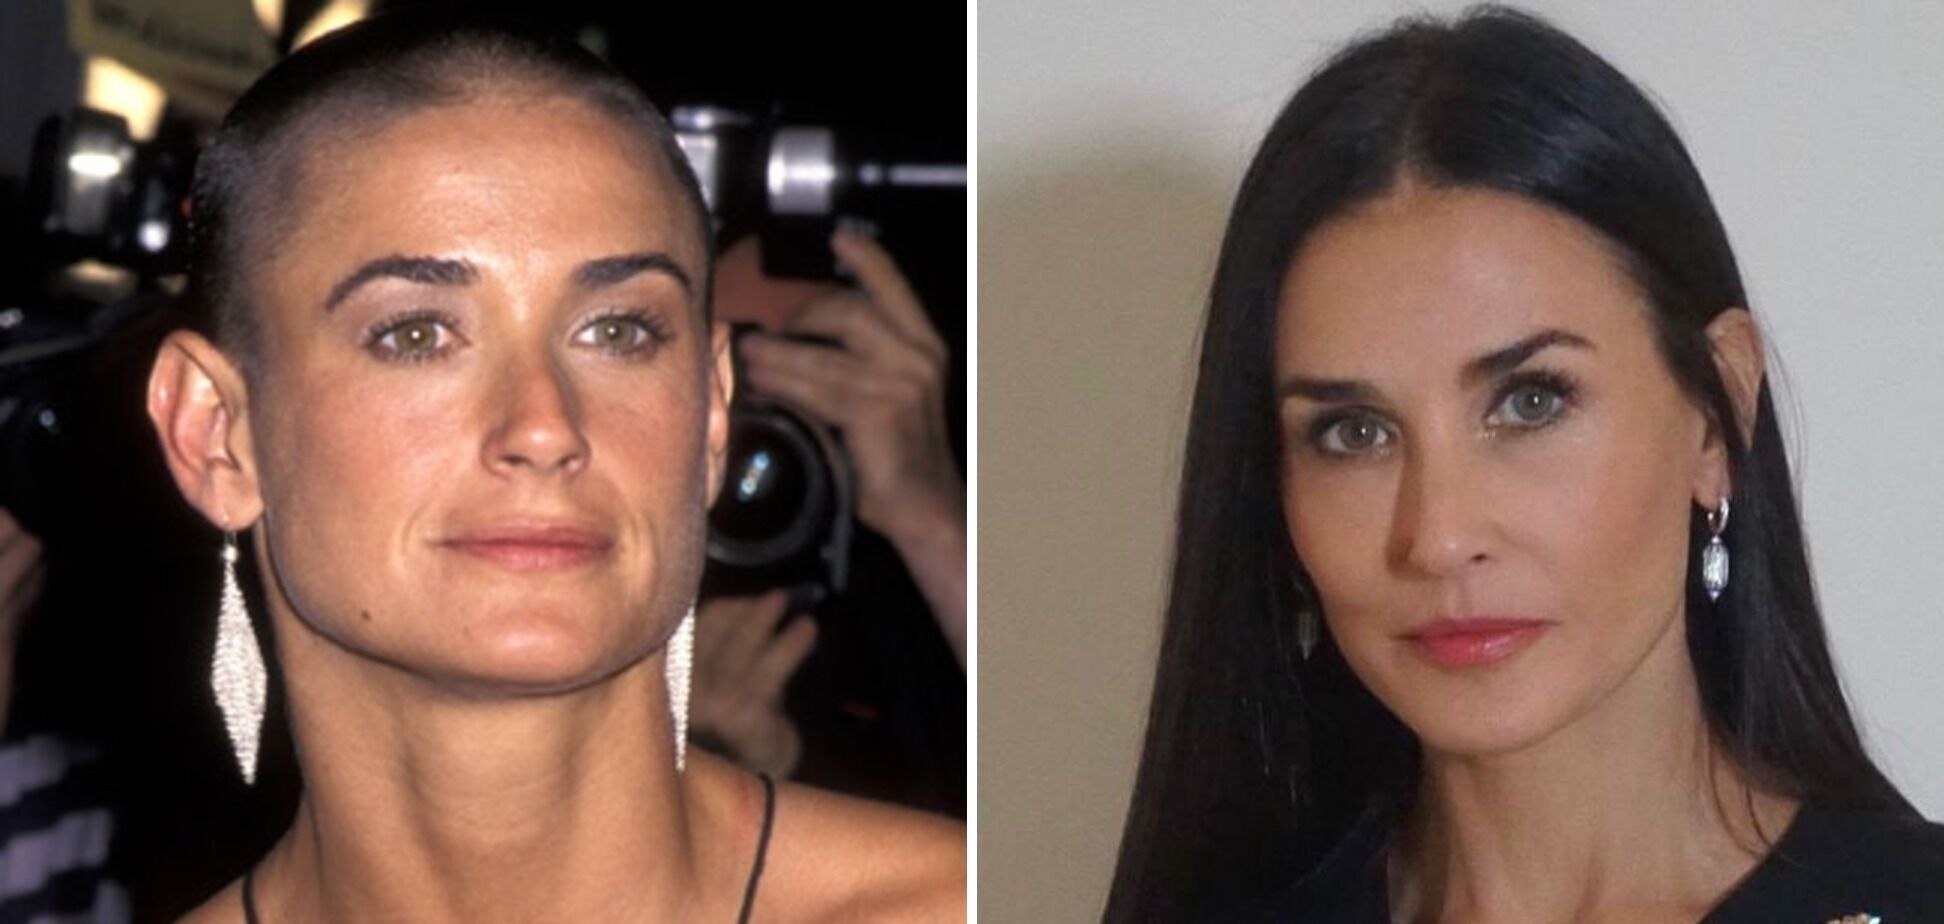 Five famous actresses who shaved their heads for a movie role, wowing fans. Photos